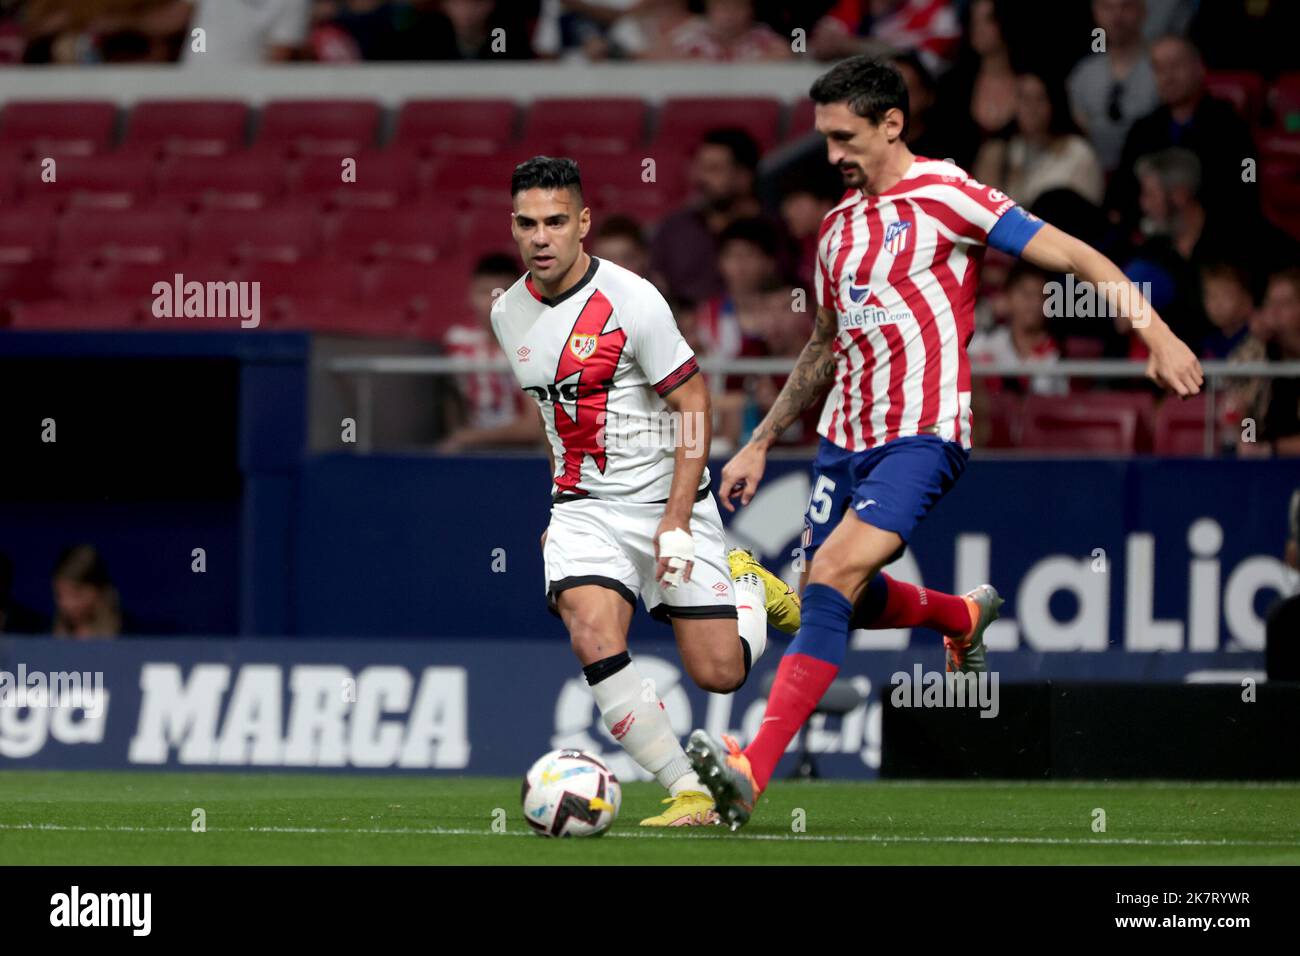 Madrid, Spanien. 18th Oct, 2022. Madrid Spain; 18.10.2022.- Atletico de Madrid Savic (R) and Rayo Vallecano player Radamel Falcao (L). Atlético de Madrid vs Rayo Vallecano Football match between Madrid teams from the Spanish League on matchday 10 held at Civitas Metropolitano Stadium to capital of the Kingdom of Spain and ended in a tie at 1. Atletico Madrid goal by Morata 20  Rayo Vallecano goal by Radamel Falcao 90 2' penalty Credit: Juan Carlos Rojas/dpa/Alamy Live News Stock Photo